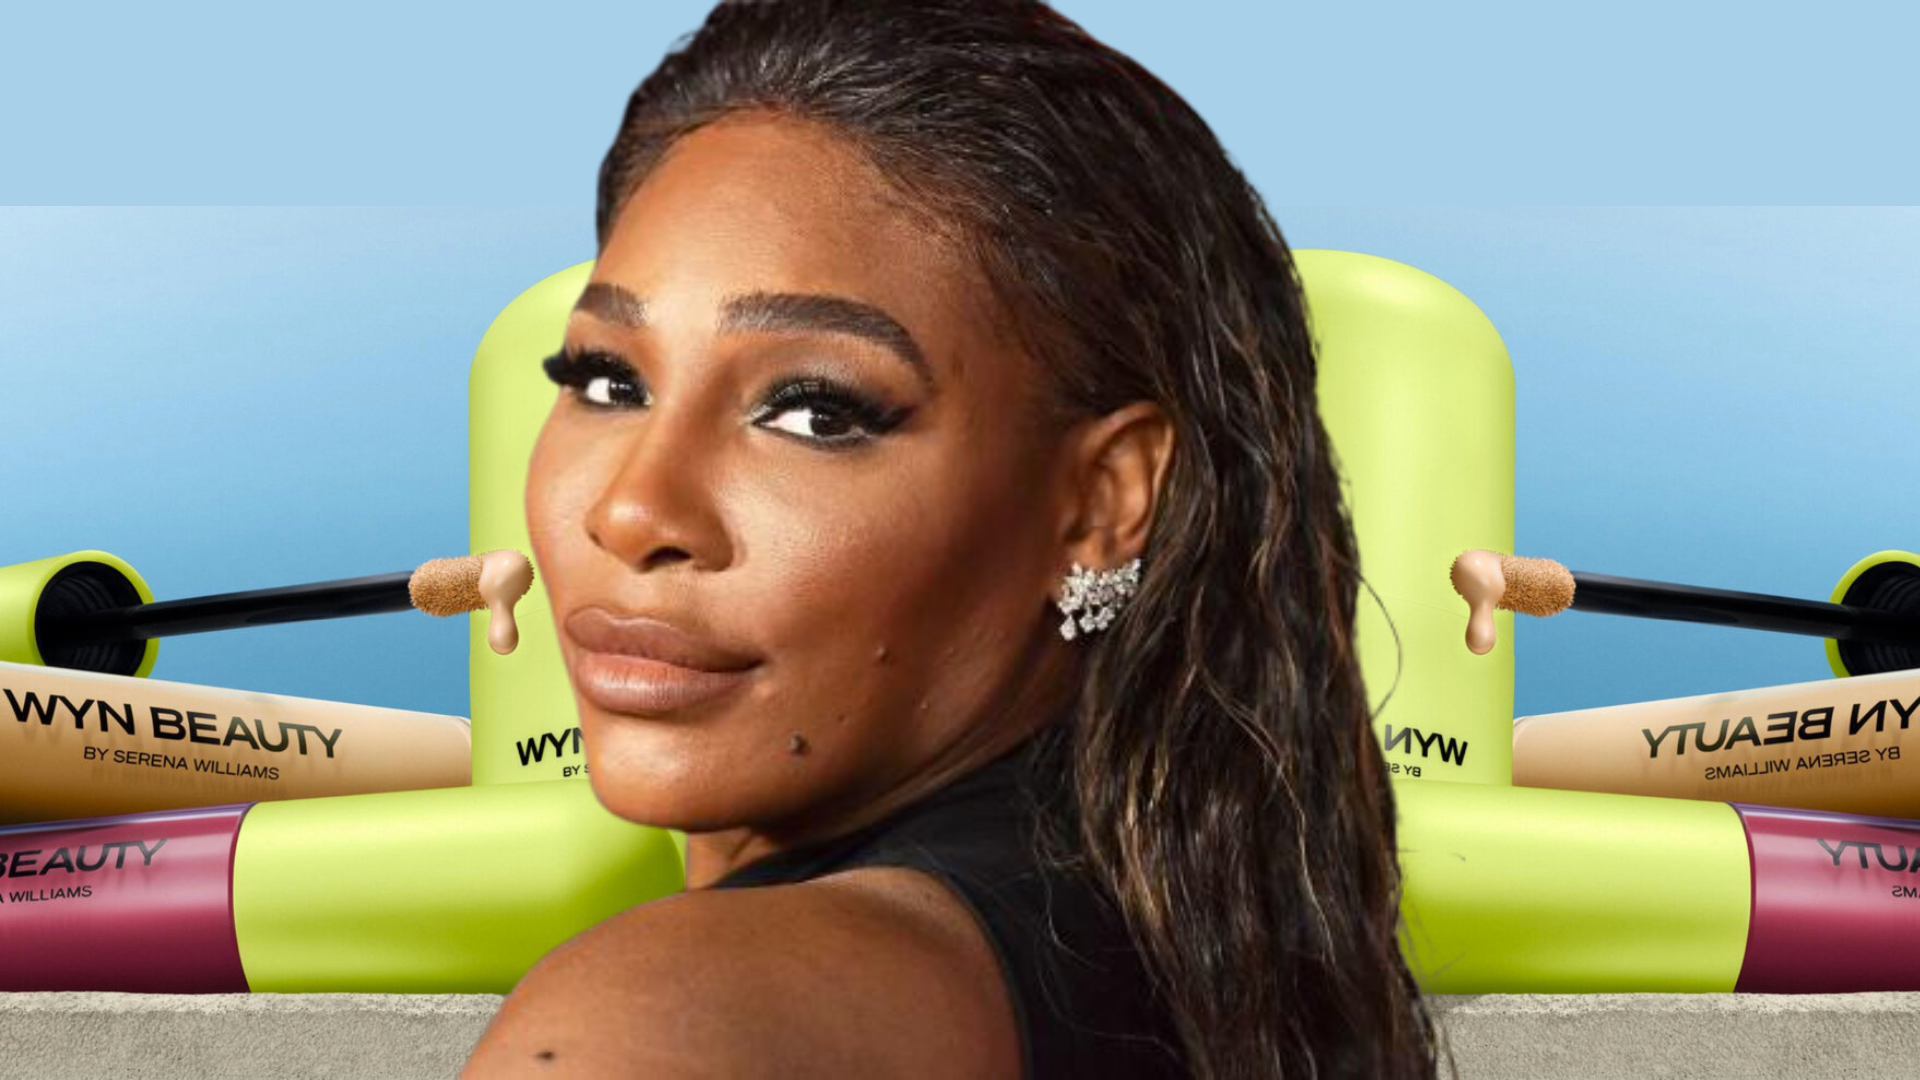 Serena Williams Launches Inclusive Make Up Line: Wyn Beauty